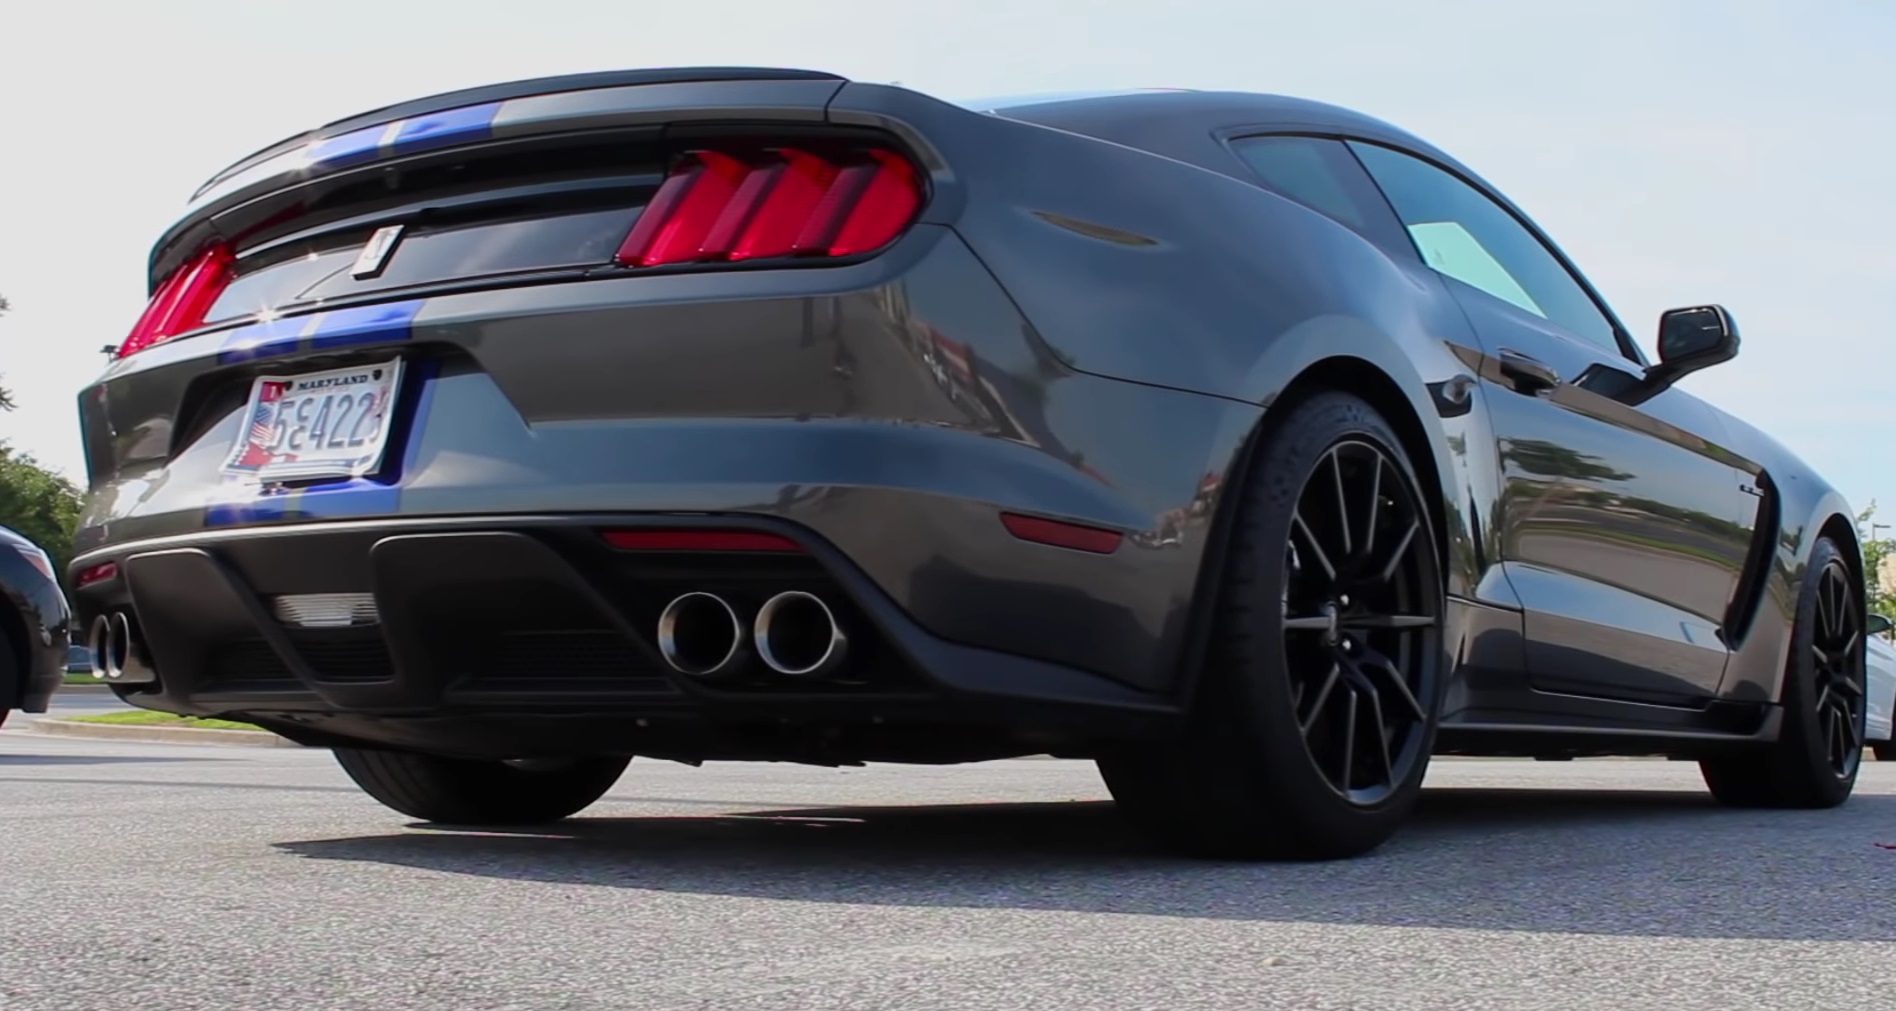 Video: 2016 Ford Mustang Shelby GT350 Full Review